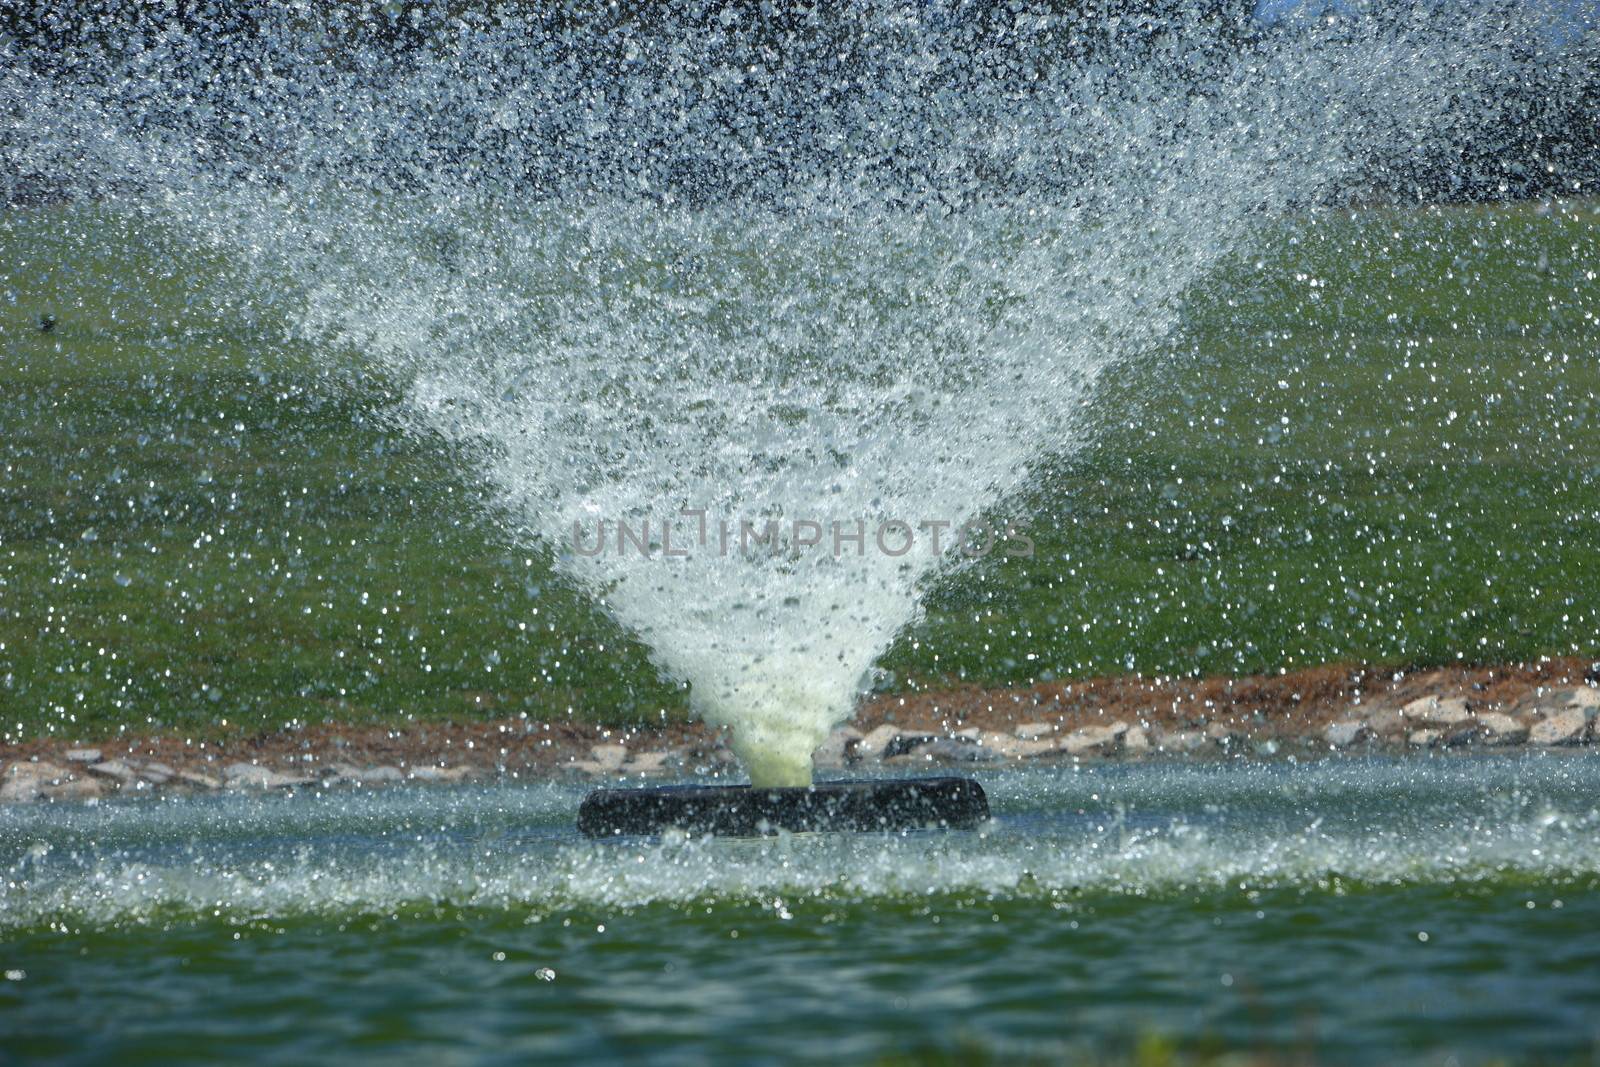 Ornamental fountain in a pond spraying out a strong conical jet of water with droplets suspended midair